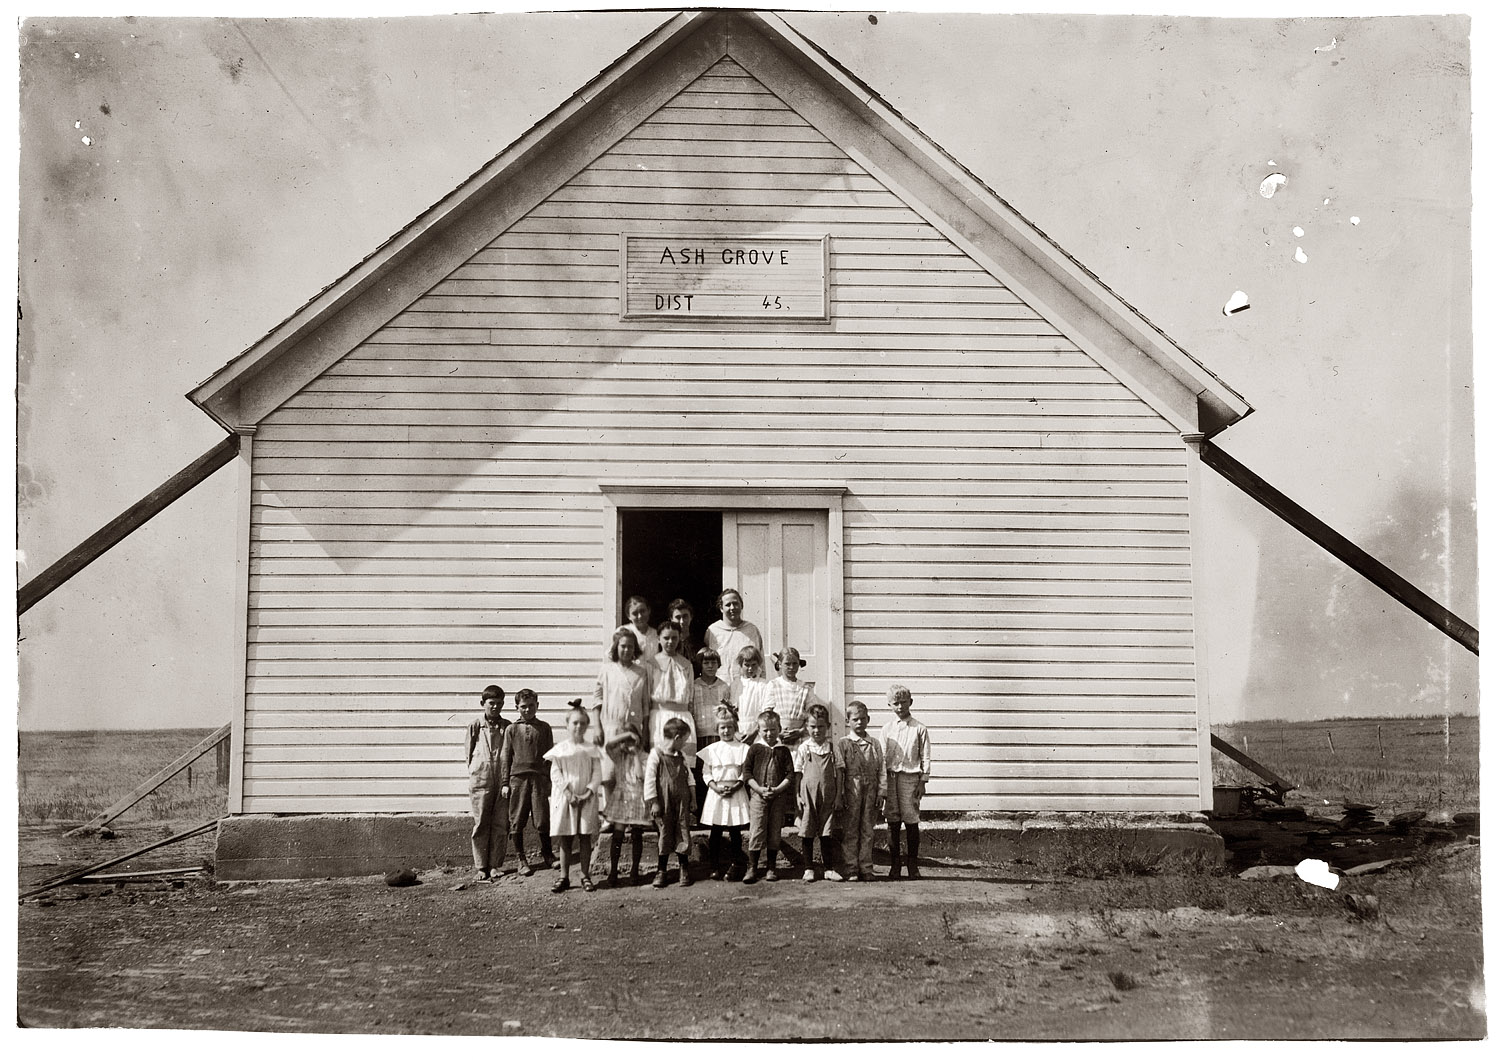 Oct. 10, 1916. Comanche County, Oklahoma. "School #45, Ash Grove; Miss Hazel McKay, Teacher. One-room school in fair condition. Opened Sept. 4 for 8 month term. Enrollment 22, average attendance 15; last year: enrollment 27, average attendance 15. The balance are picking cotton and also five more that have not enrolled at all. Pickers may be out two weeks more. Teacher expects 30 enrolled after picking is over." View full size. Photo and caption by Lewis Wickes Hine.